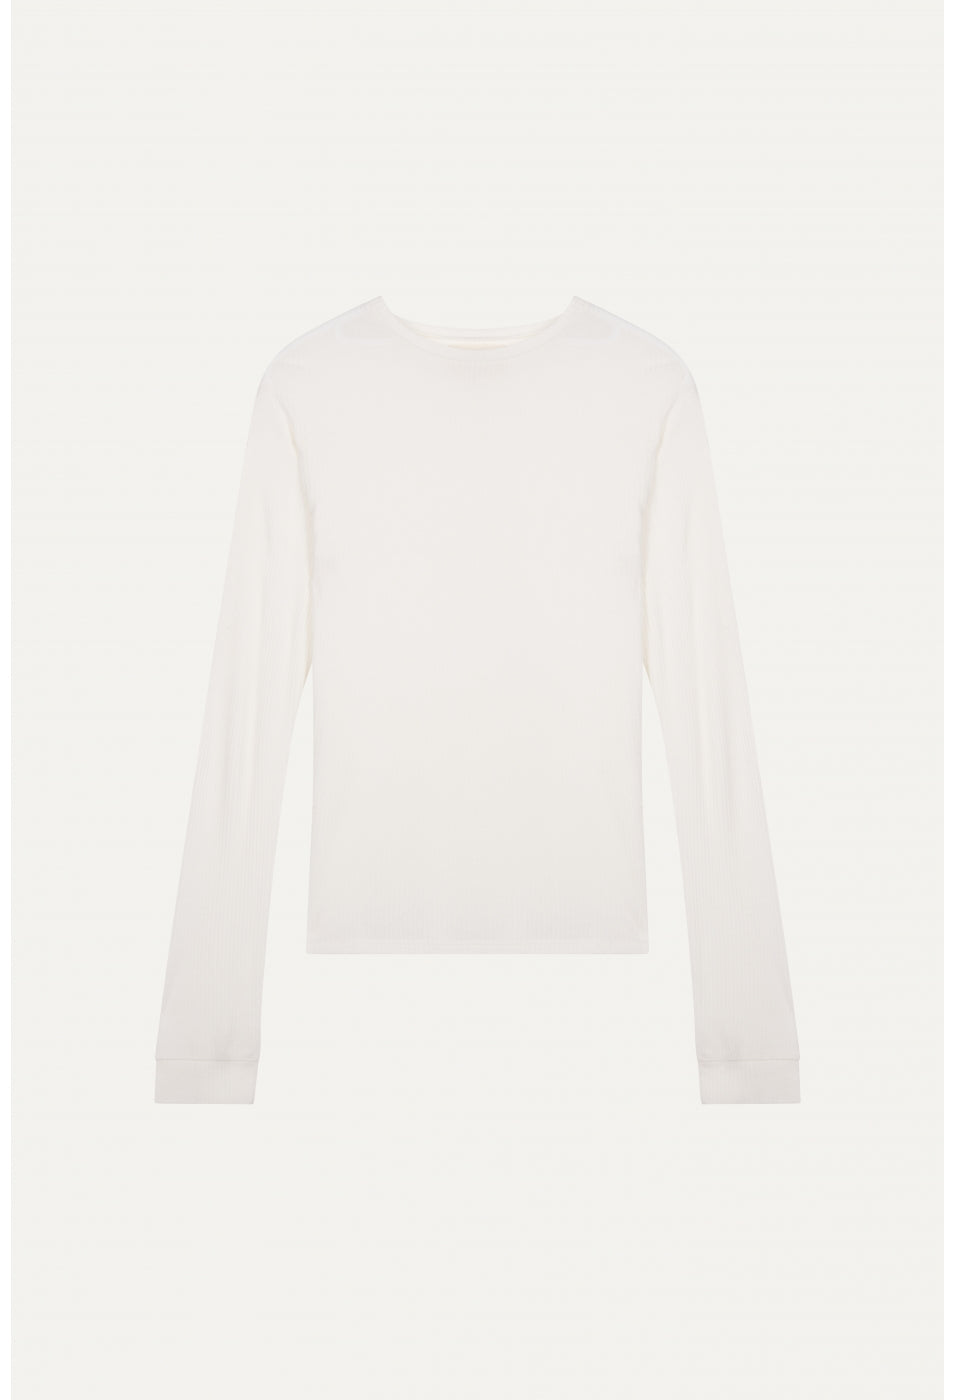 ORTIGIA LONG SLEEVE TOP IN WHITE BY LOULOU STUDIO